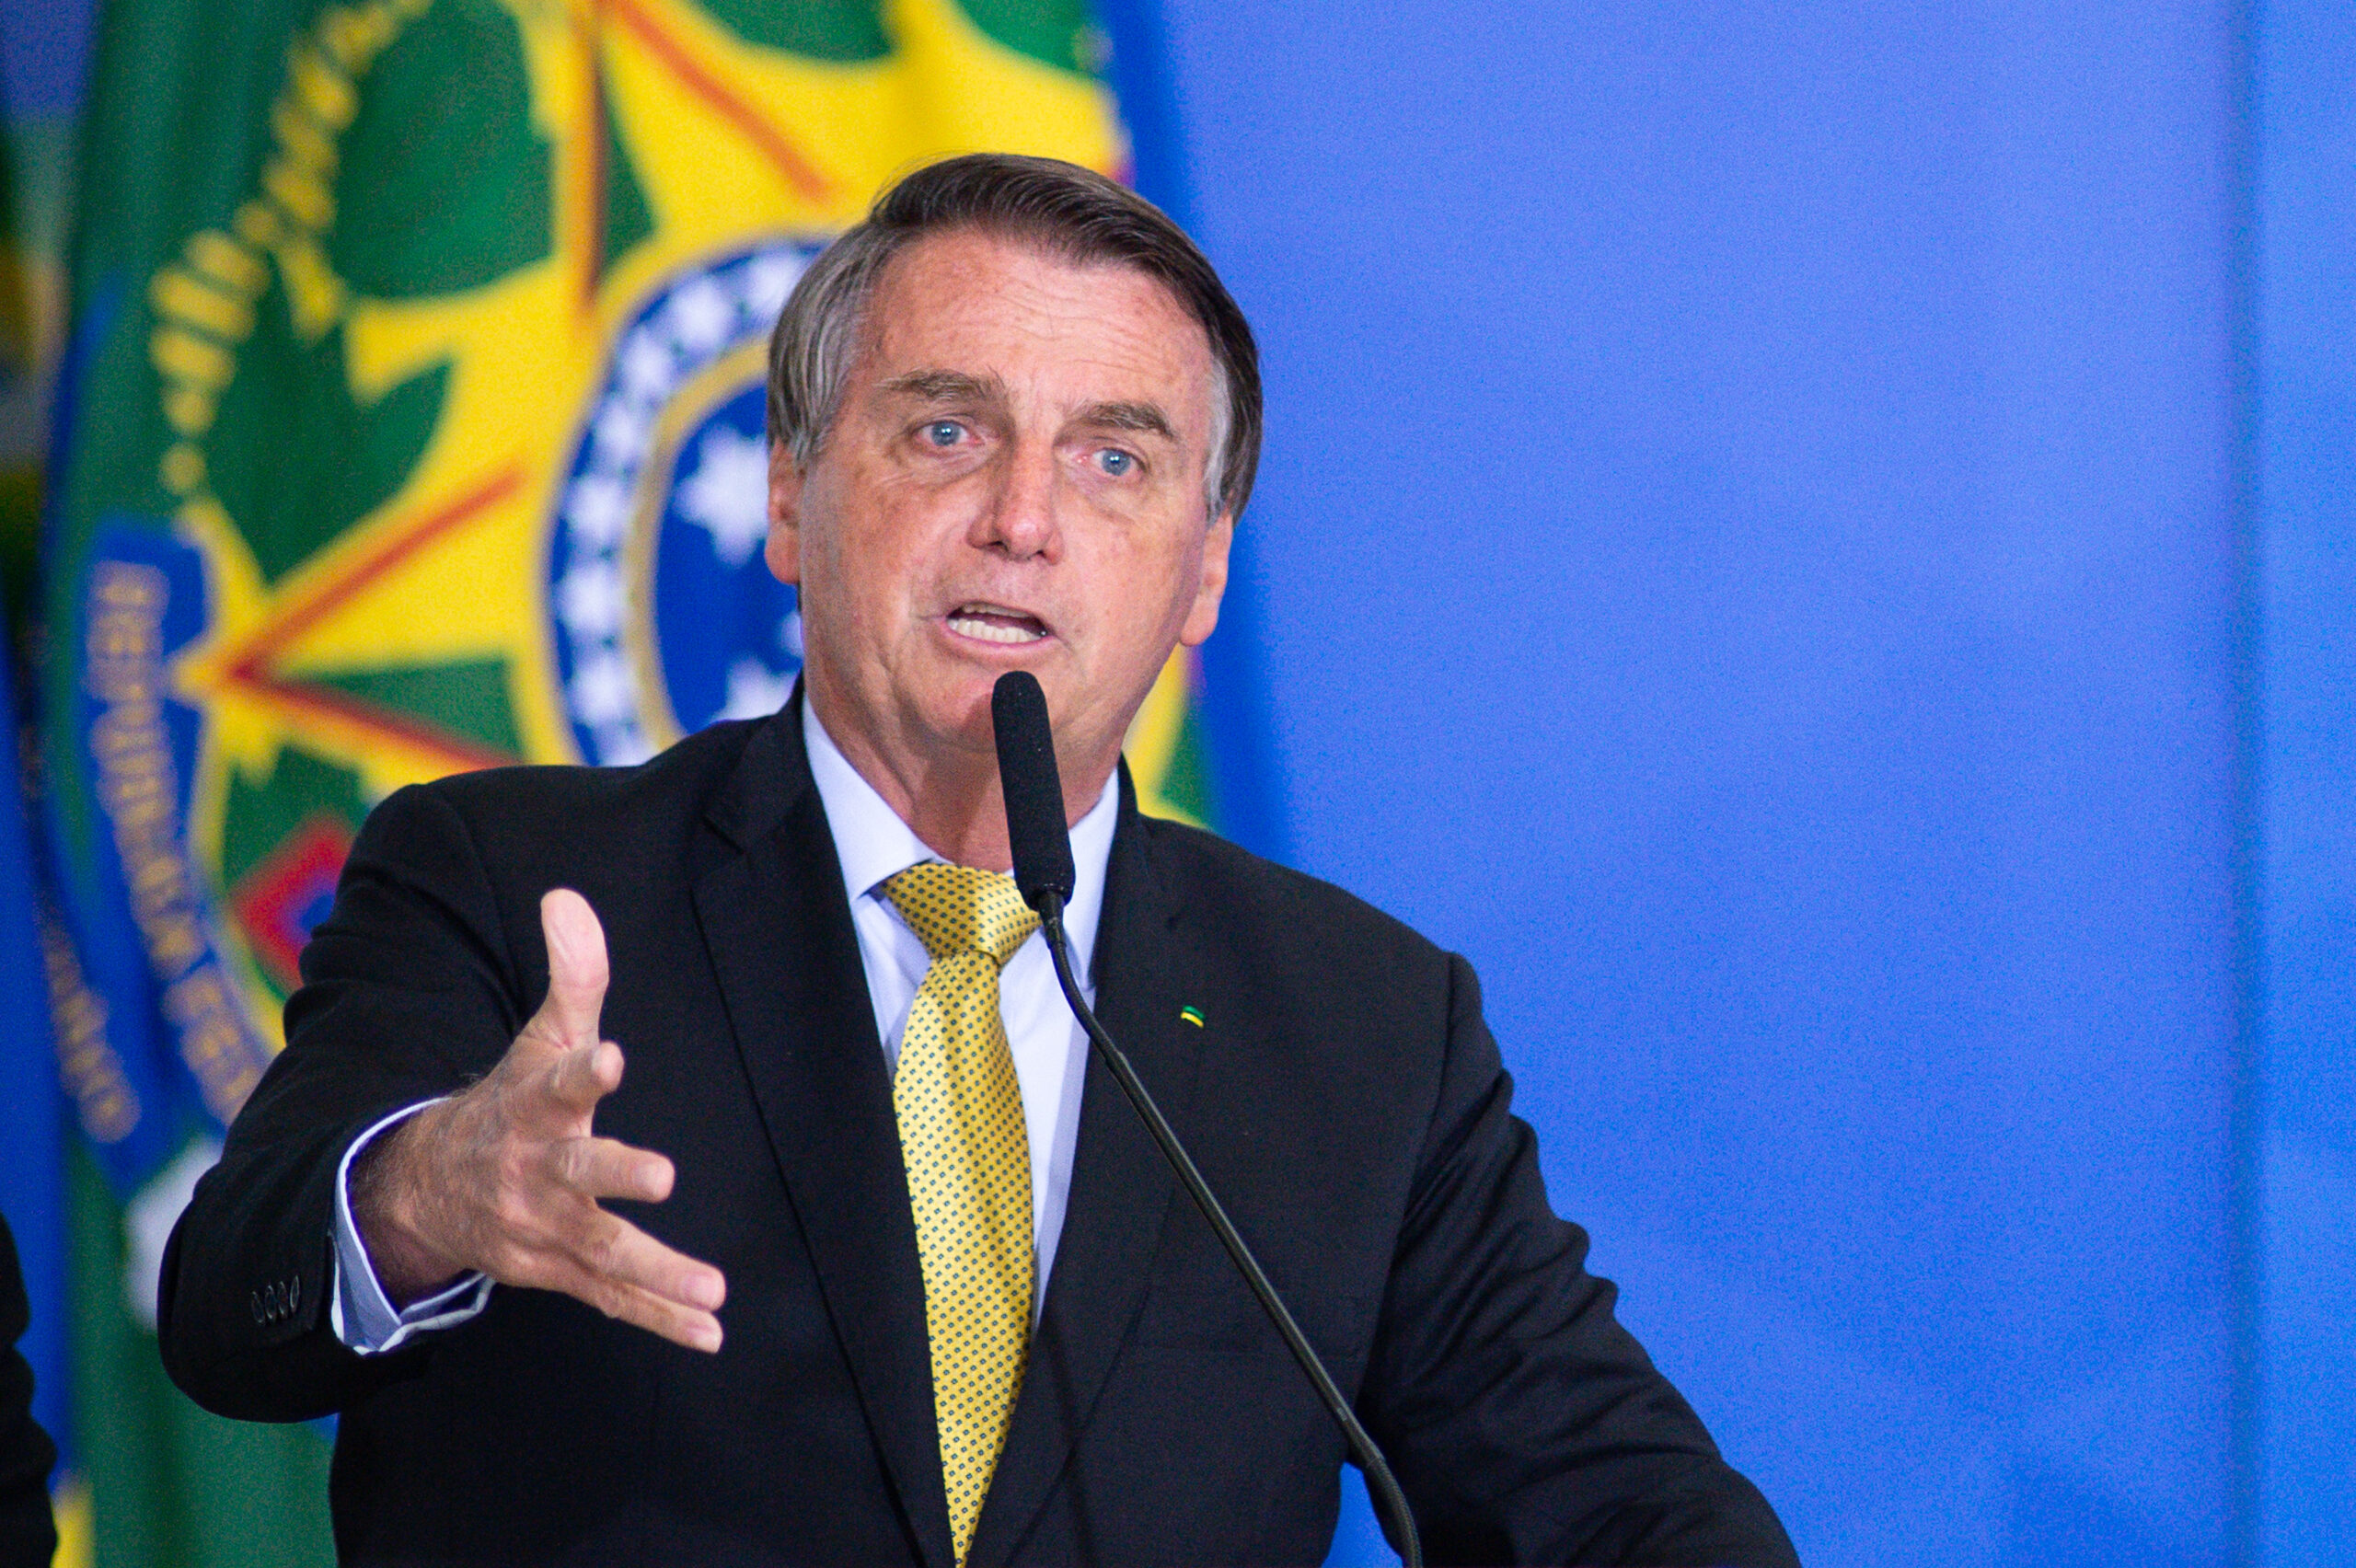 Brazil | Crisis around presidential election likely